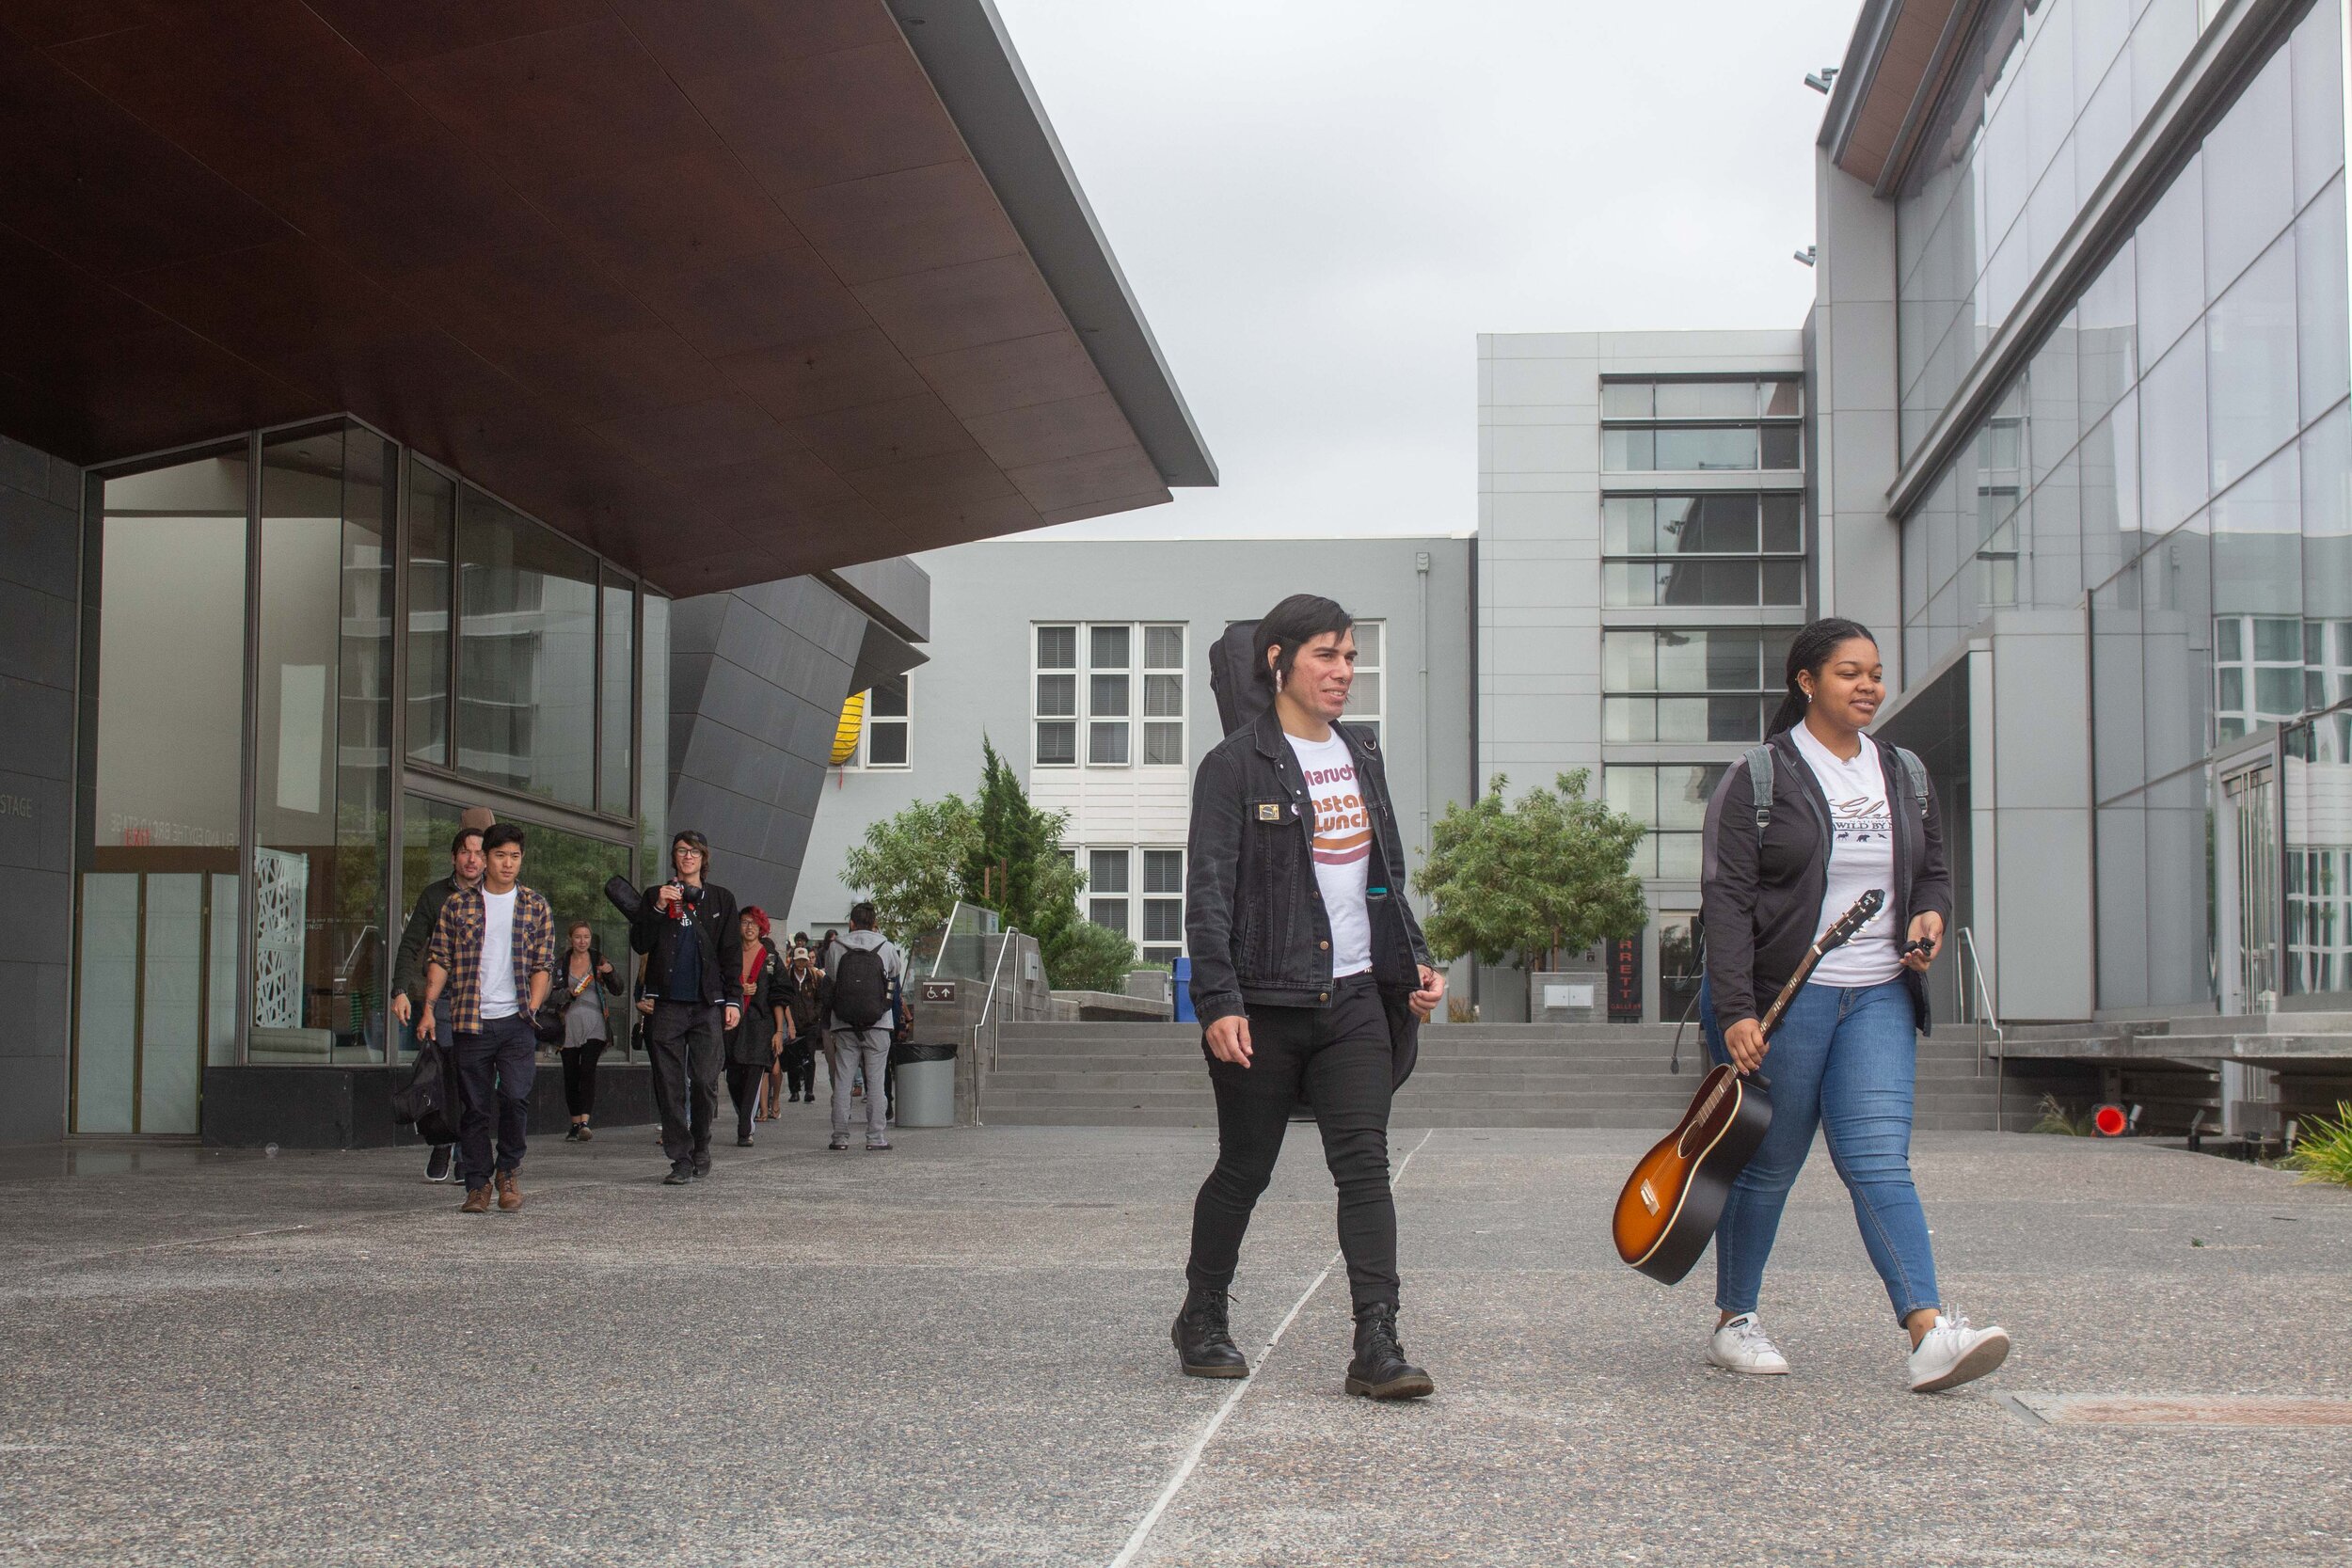  Students exit Santa Monica College's Performing Arts Center with their instruments during the Great ShakeOut 2019, a statewide earthquake preparedness drill, on October 17, 2019, in Santa Monica, Calif. 